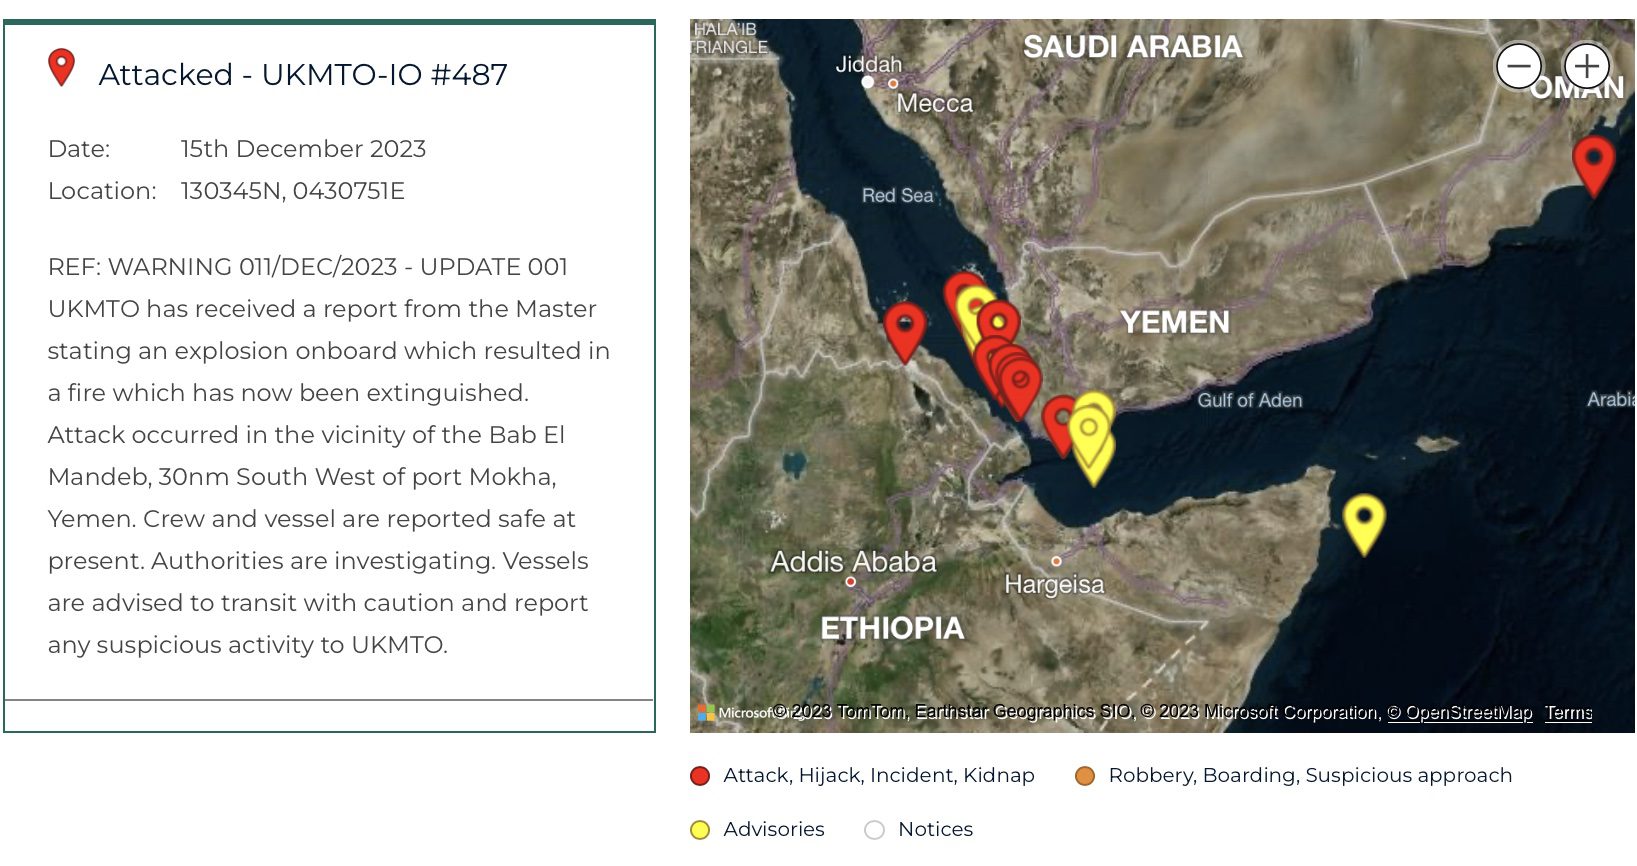 A UKMTO alert about an attack and map showing recent incidents in the region. Image courtesy UKMTO